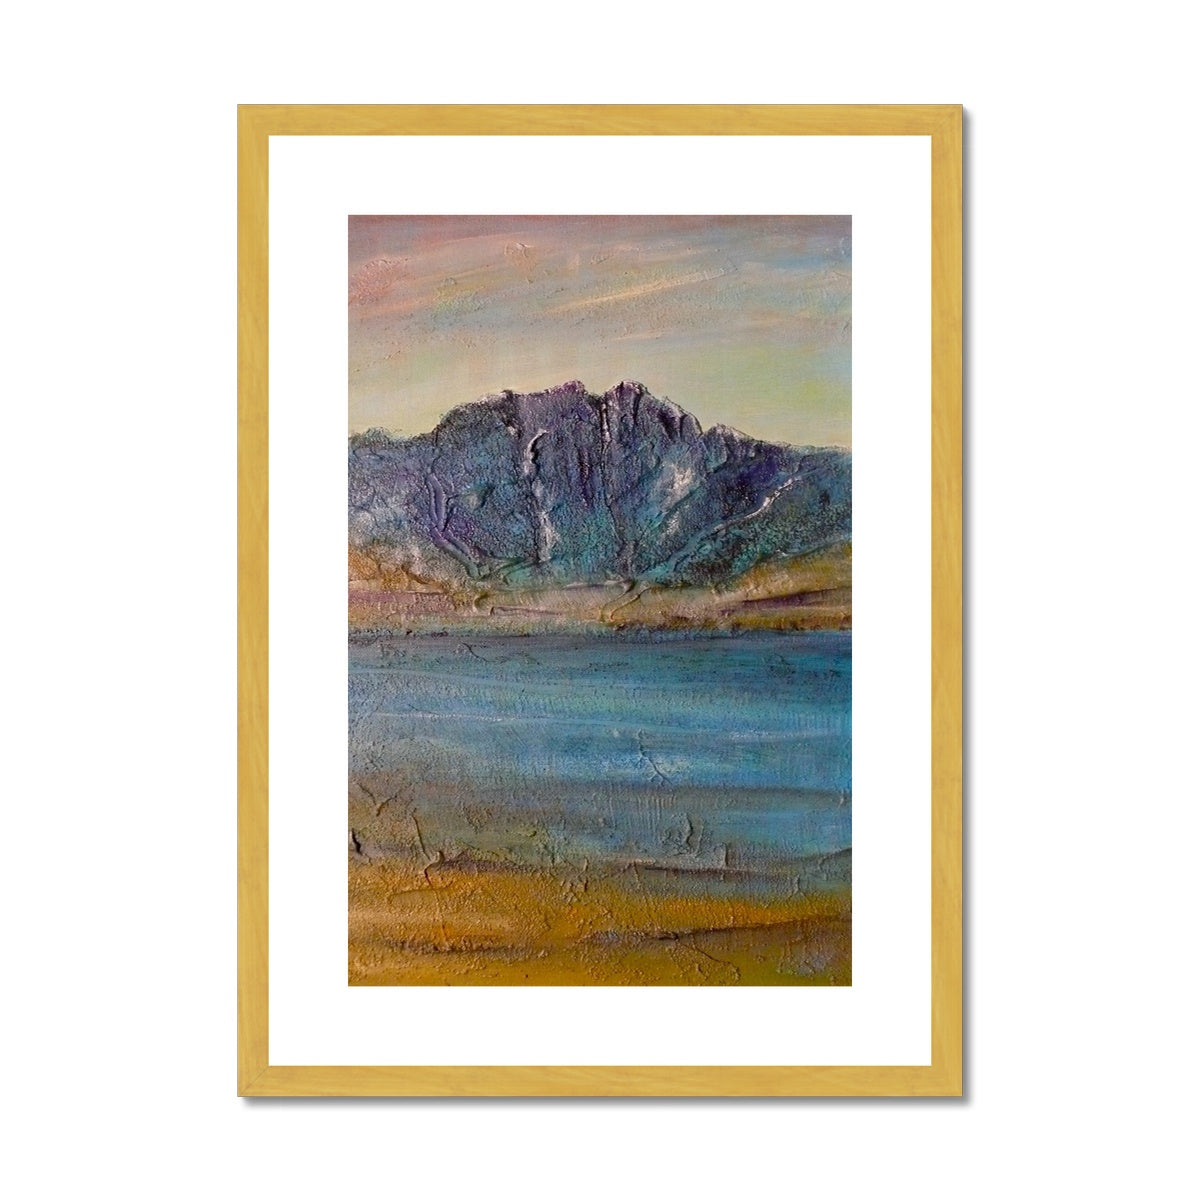 Torridon Painting | Antique Framed & Mounted Prints From Scotland-Antique Framed & Mounted Prints-Scottish Lochs & Mountains Art Gallery-A2 Portrait-Gold Frame-Paintings, Prints, Homeware, Art Gifts From Scotland By Scottish Artist Kevin Hunter